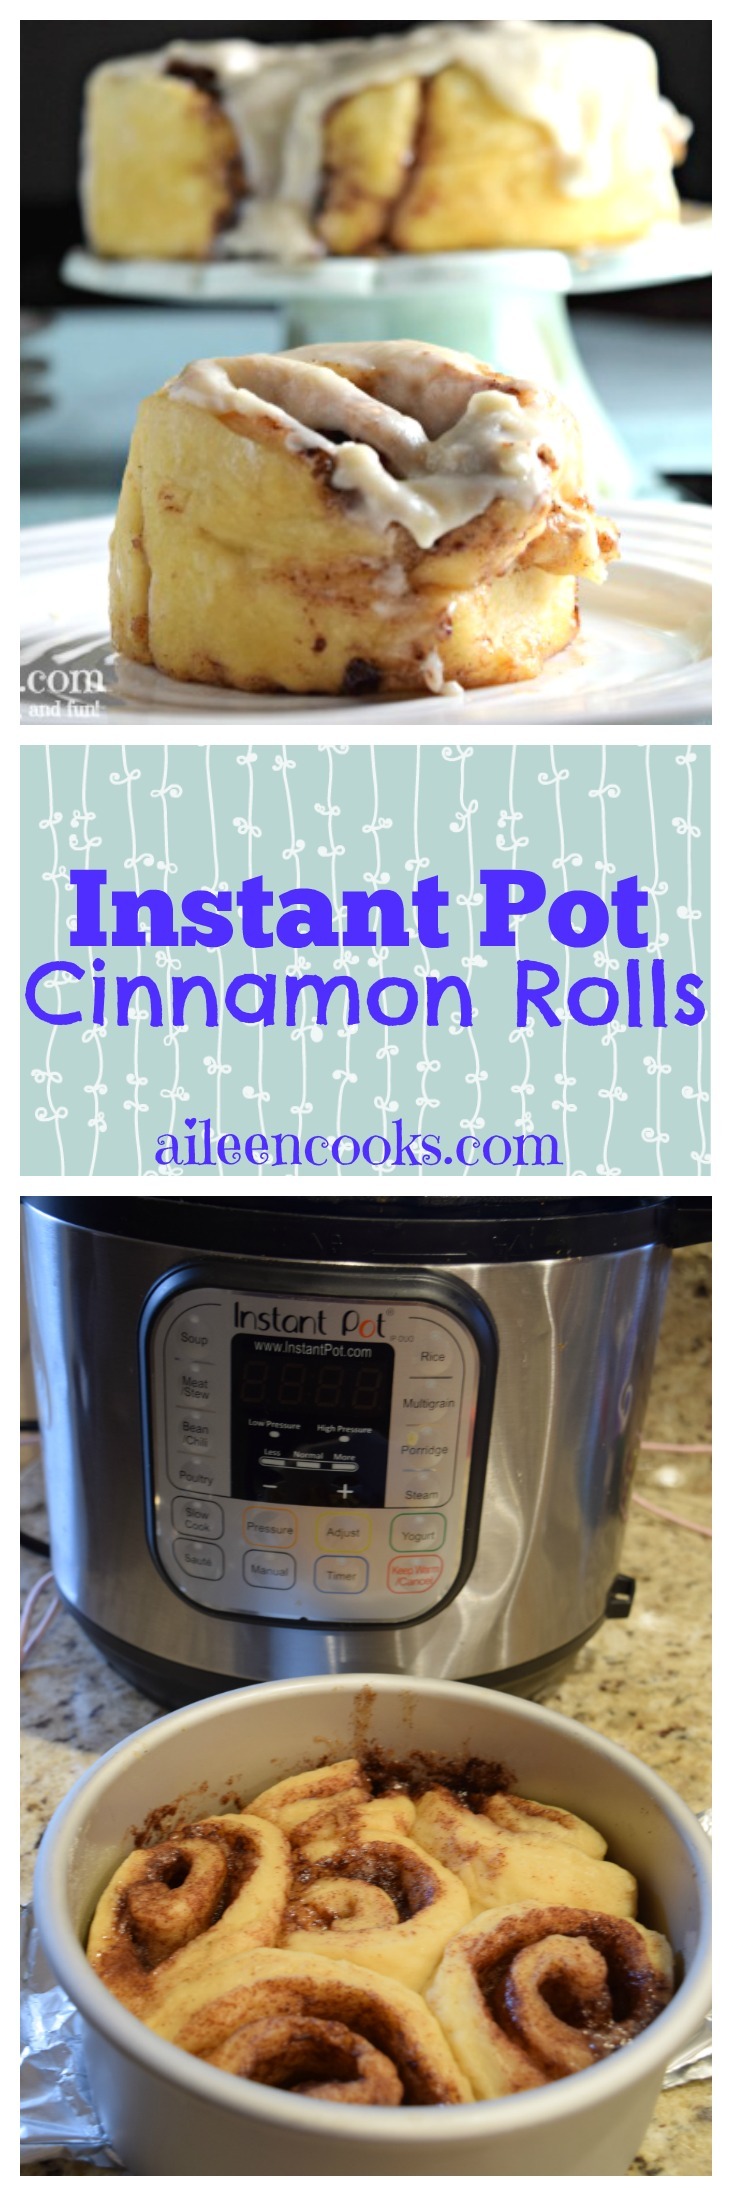 Instant Pot Cinnamon Rolls from Scratch - Aileen Cooks